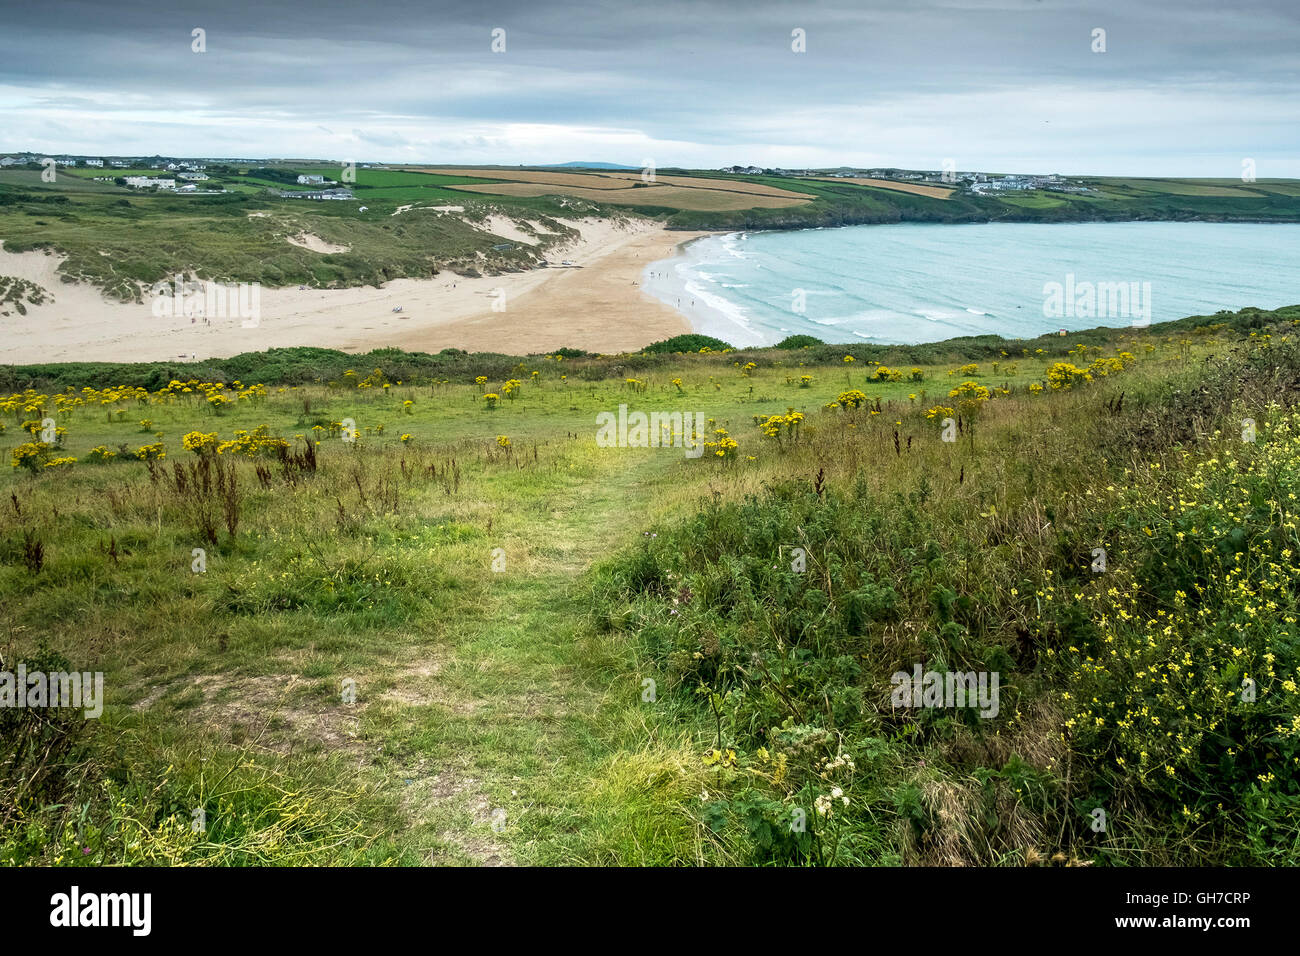 Crantock Beach seen from East Pentire Headland in Newquay, Cornwall. Stock Photo